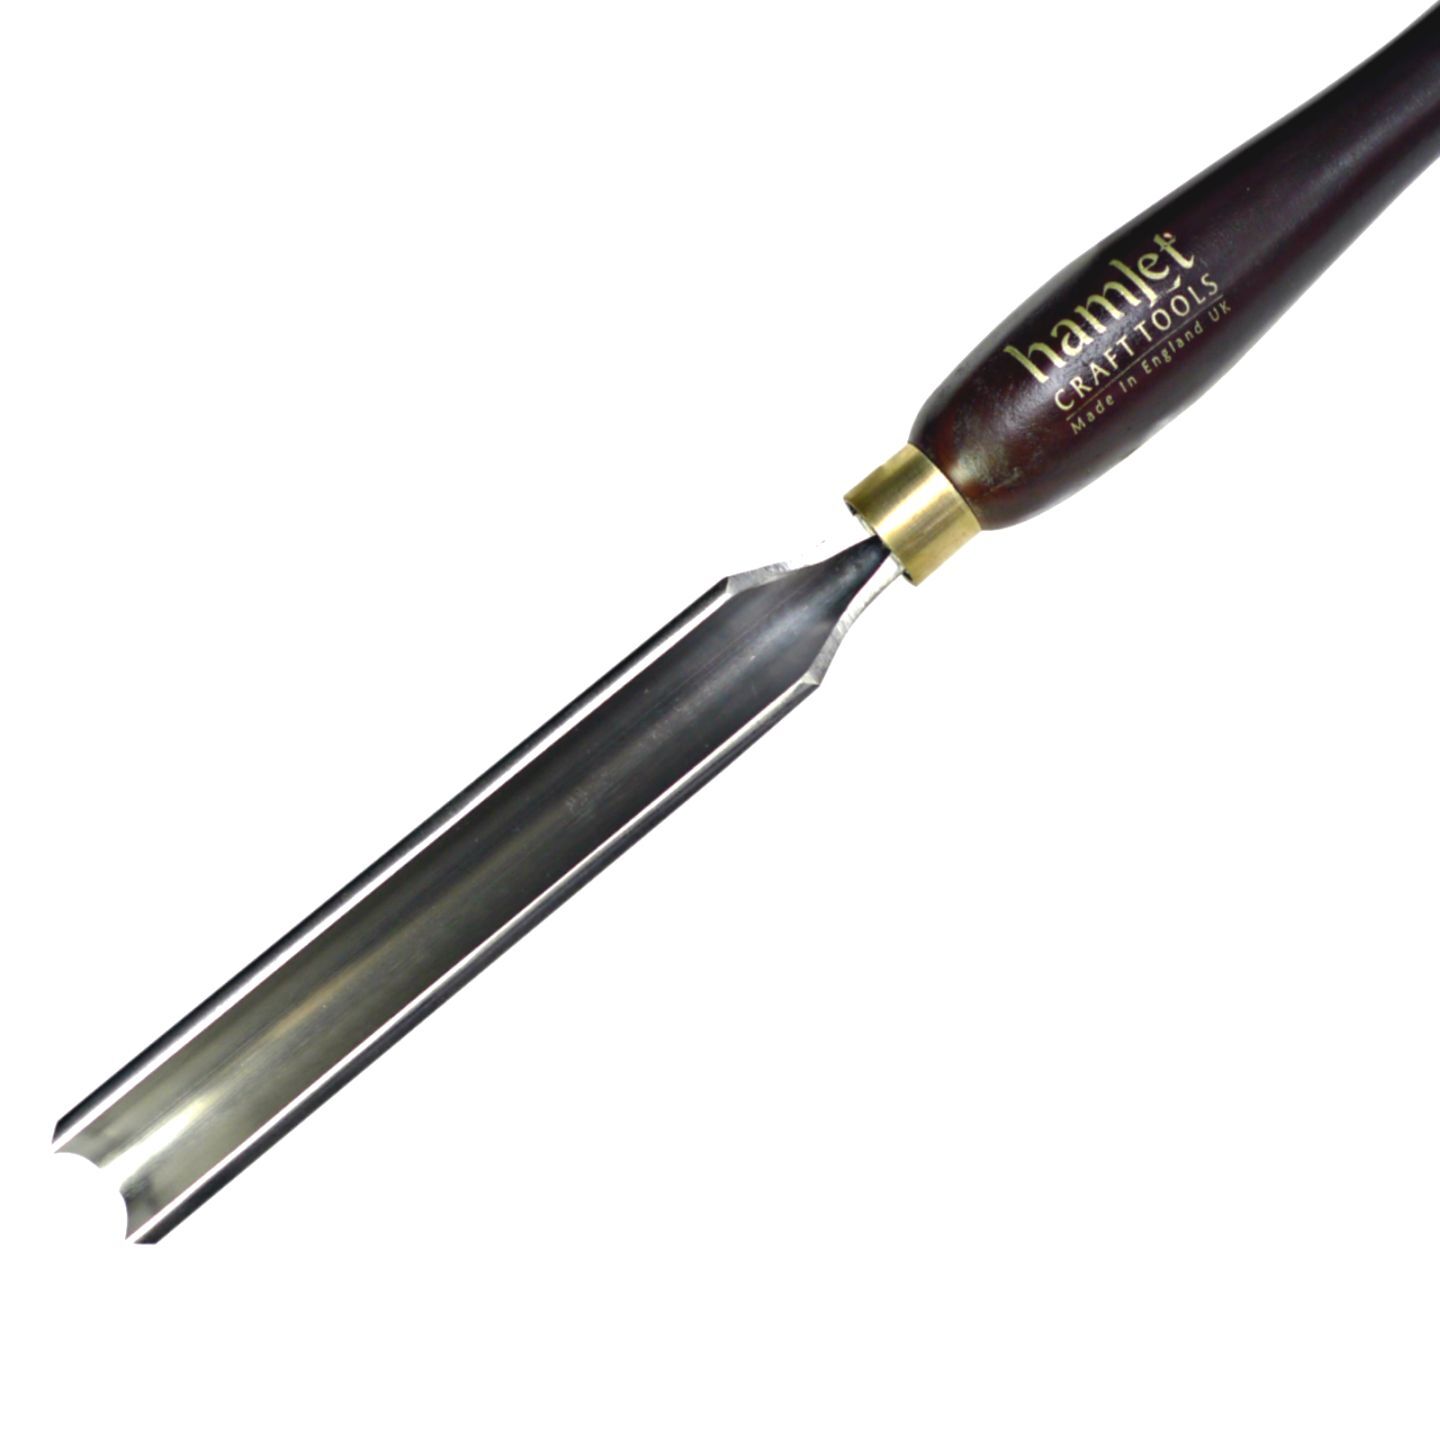 Hamlet HCT064 Spindle Roughing Gouge - 3/4"